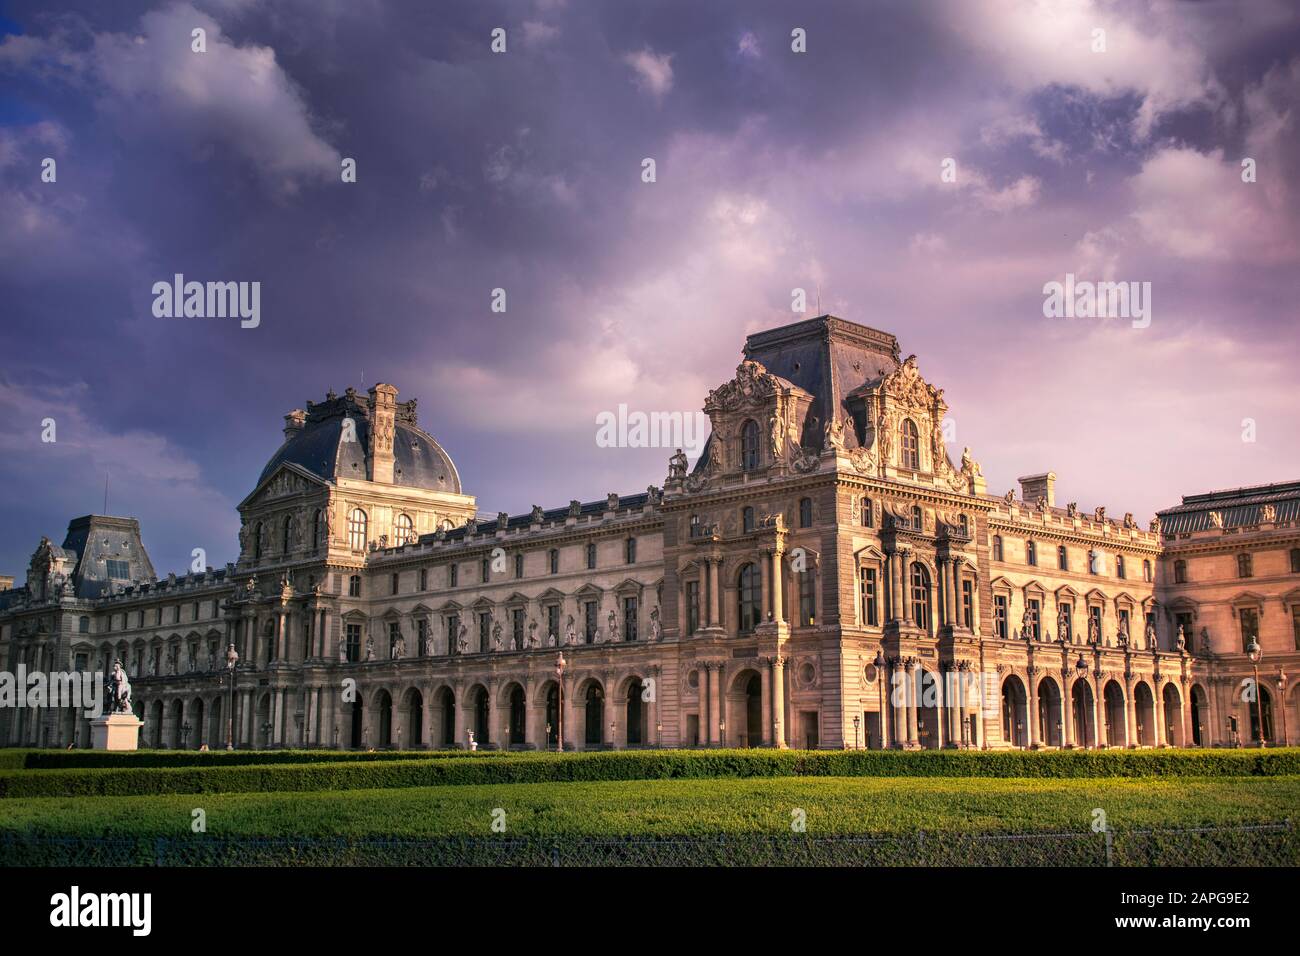 louvre museum on a sunset evening Stock Photo